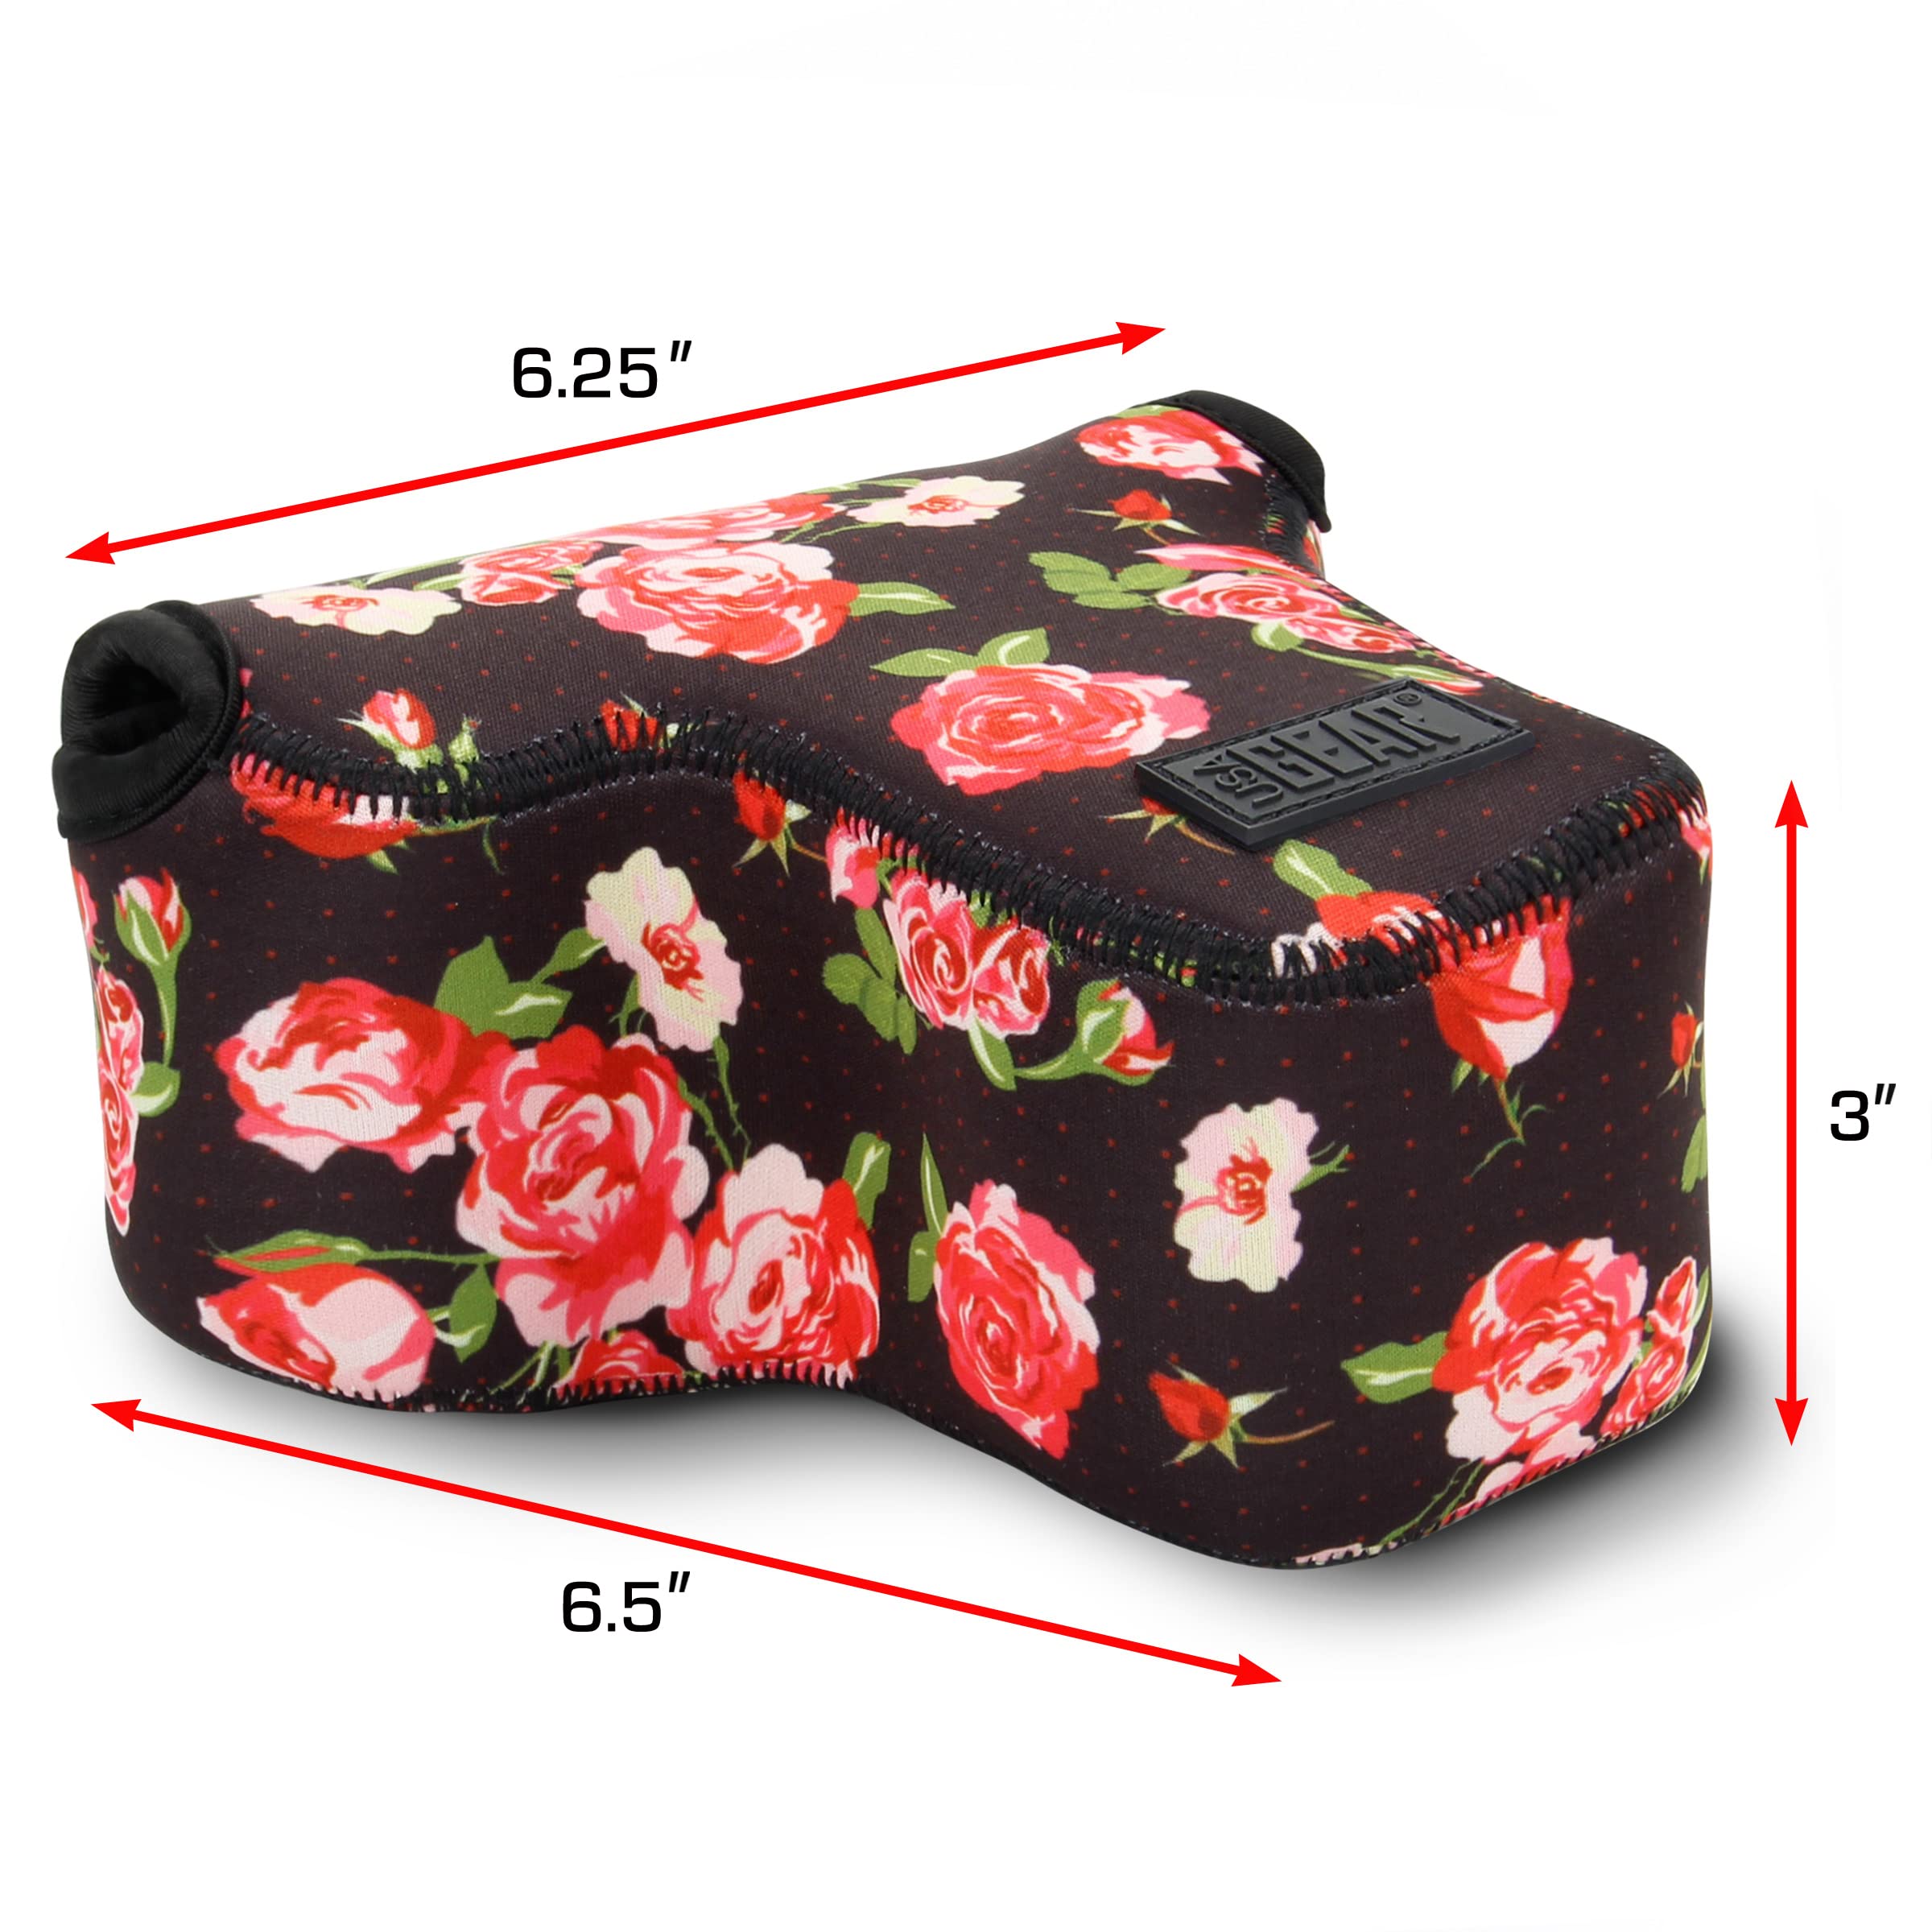 USA Gear DSLR Camera Sleeve with Neoprene Protection and TrueSHOT Padded Camera Neck Strap - Durable, Lightweight and Water Resistant - Compatible with Canon, Nikon, Sony and More Cameras (Floral)